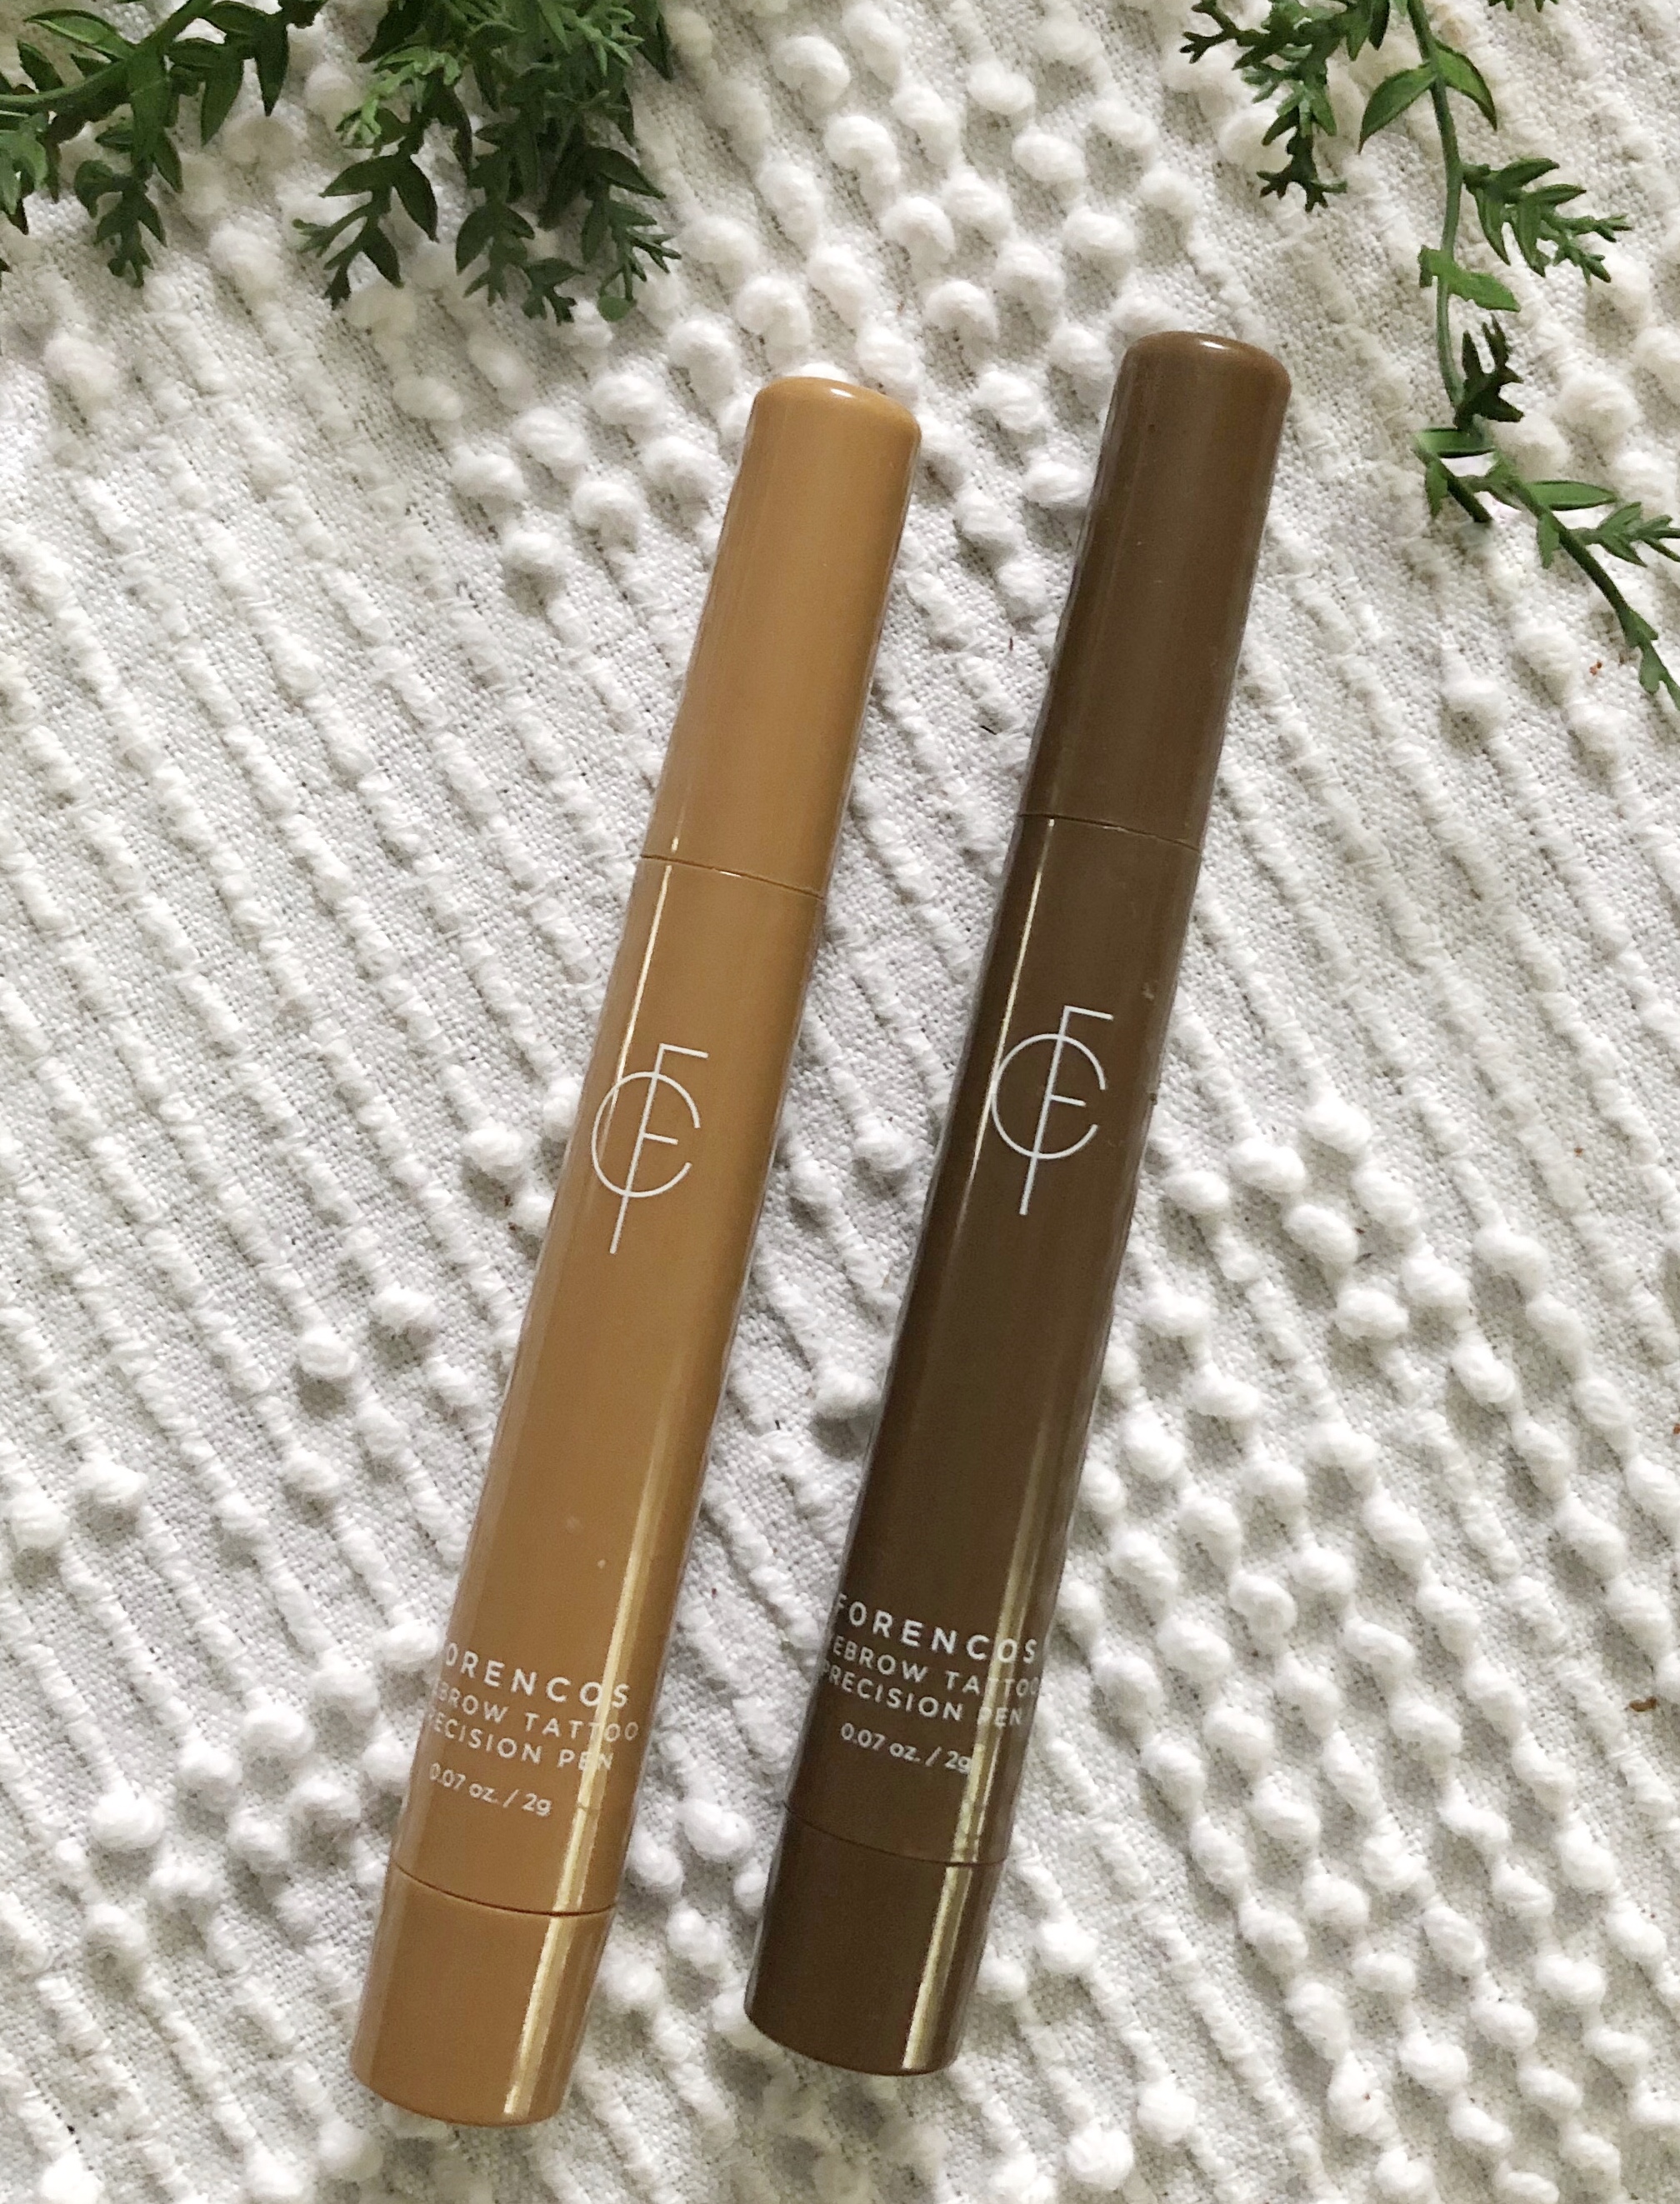 Forencos Precision Brow Pen by The Beauty Spy - House on Winchester